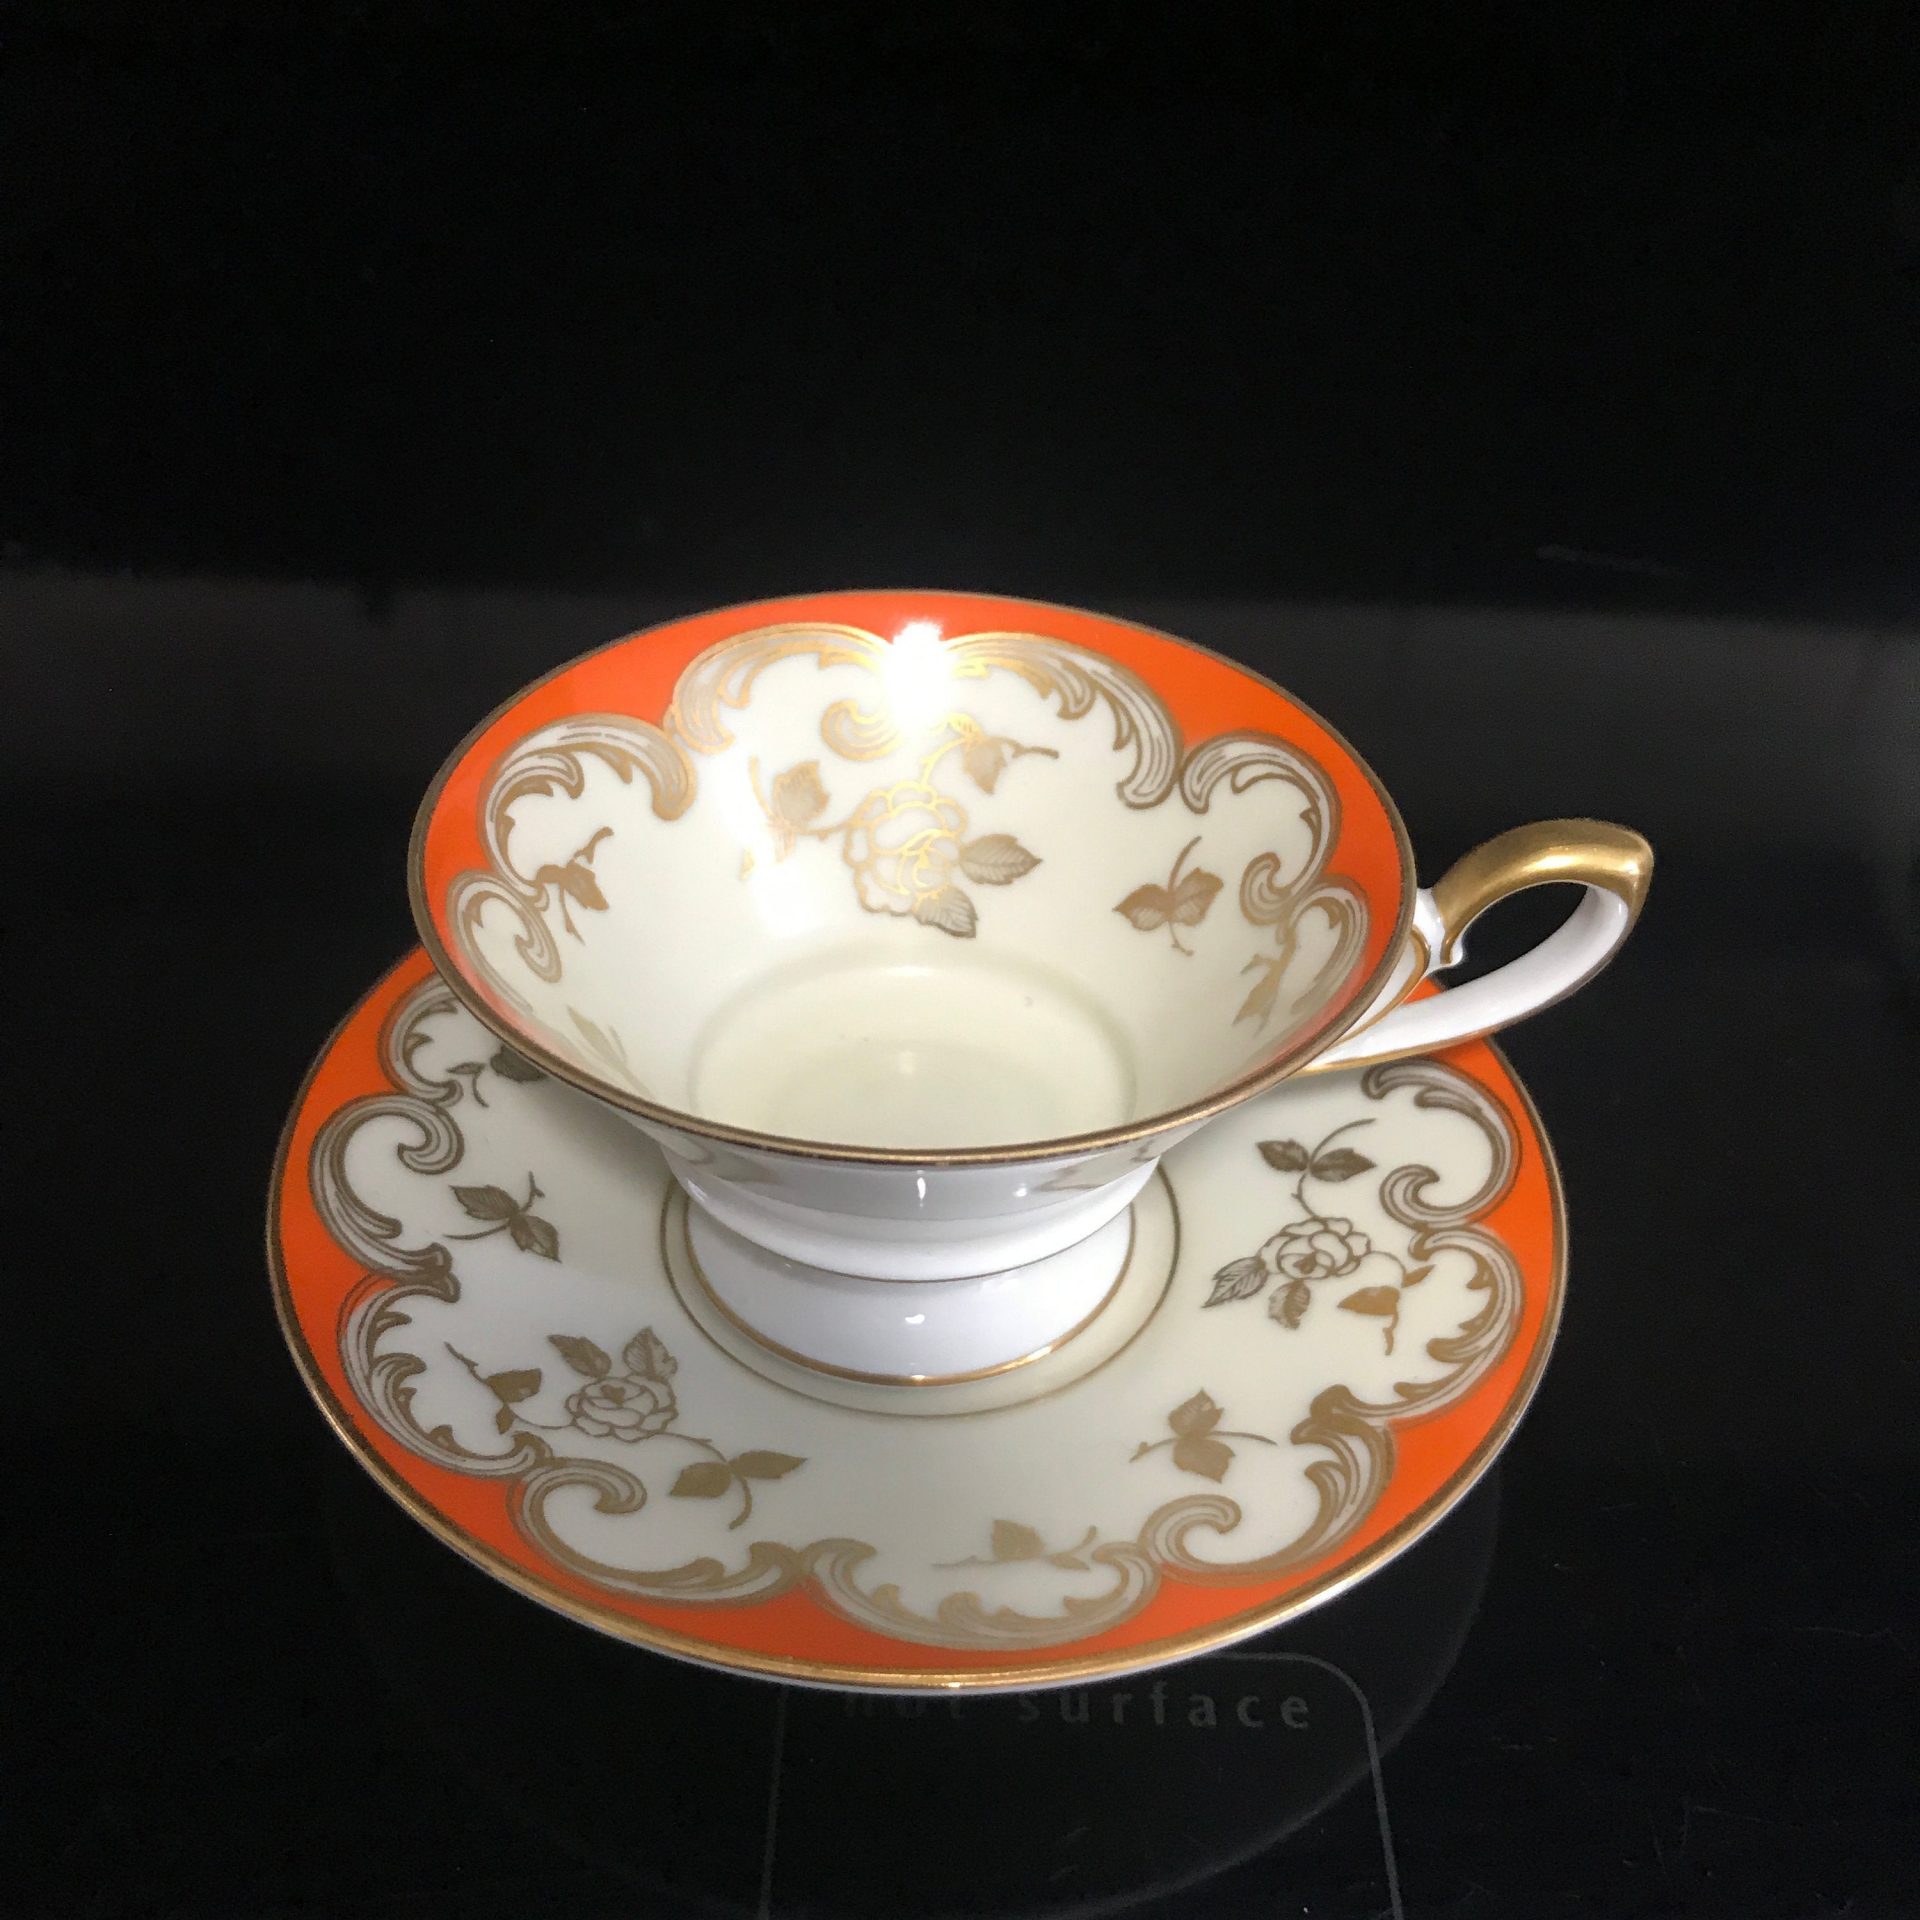 https://www.truevintageantiques.com/wp-content/uploads/2021/05/antique-demitasse-tea-cup-and-saucer-tirschenreuth-bavaria-germany-ivory-with-orange-and-gold-fine-bone-china-collectible-farmhouse-bridal-6099ba581-scaled.jpg